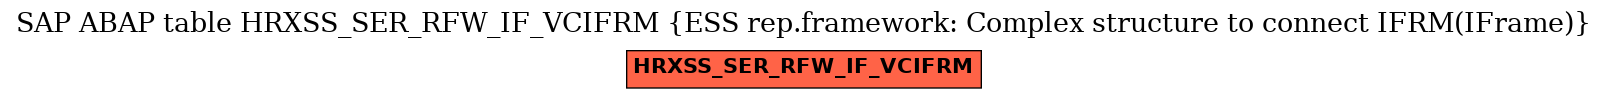 E-R Diagram for table HRXSS_SER_RFW_IF_VCIFRM (ESS rep.framework: Complex structure to connect IFRM(IFrame))